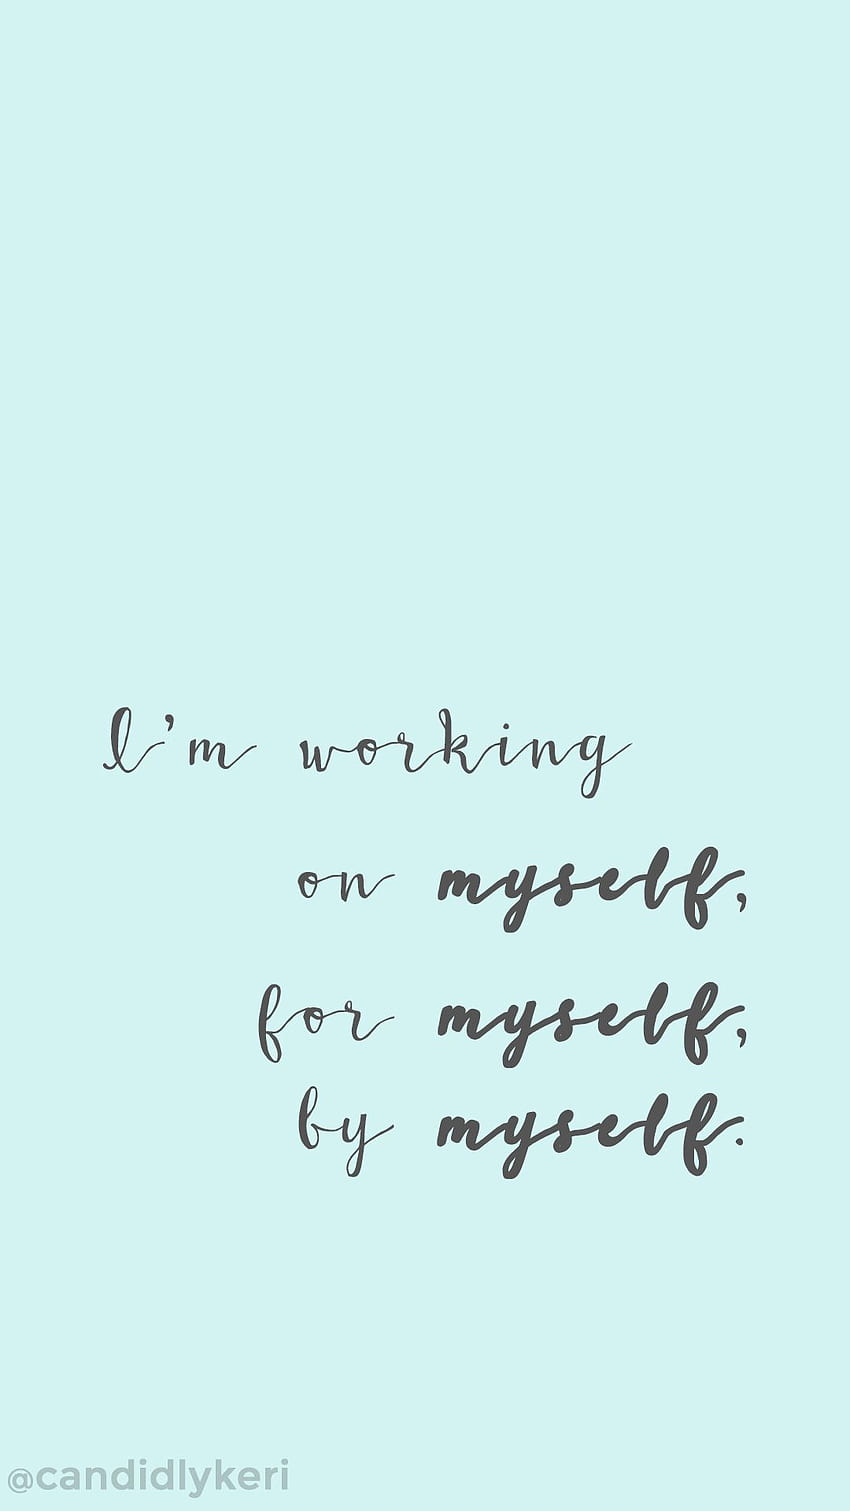 Im working on myself, by myself, for myself motivation inspirational quote you. Inspirational quotes , Positive quotes, Inspirational quotes HD phone wallpaper